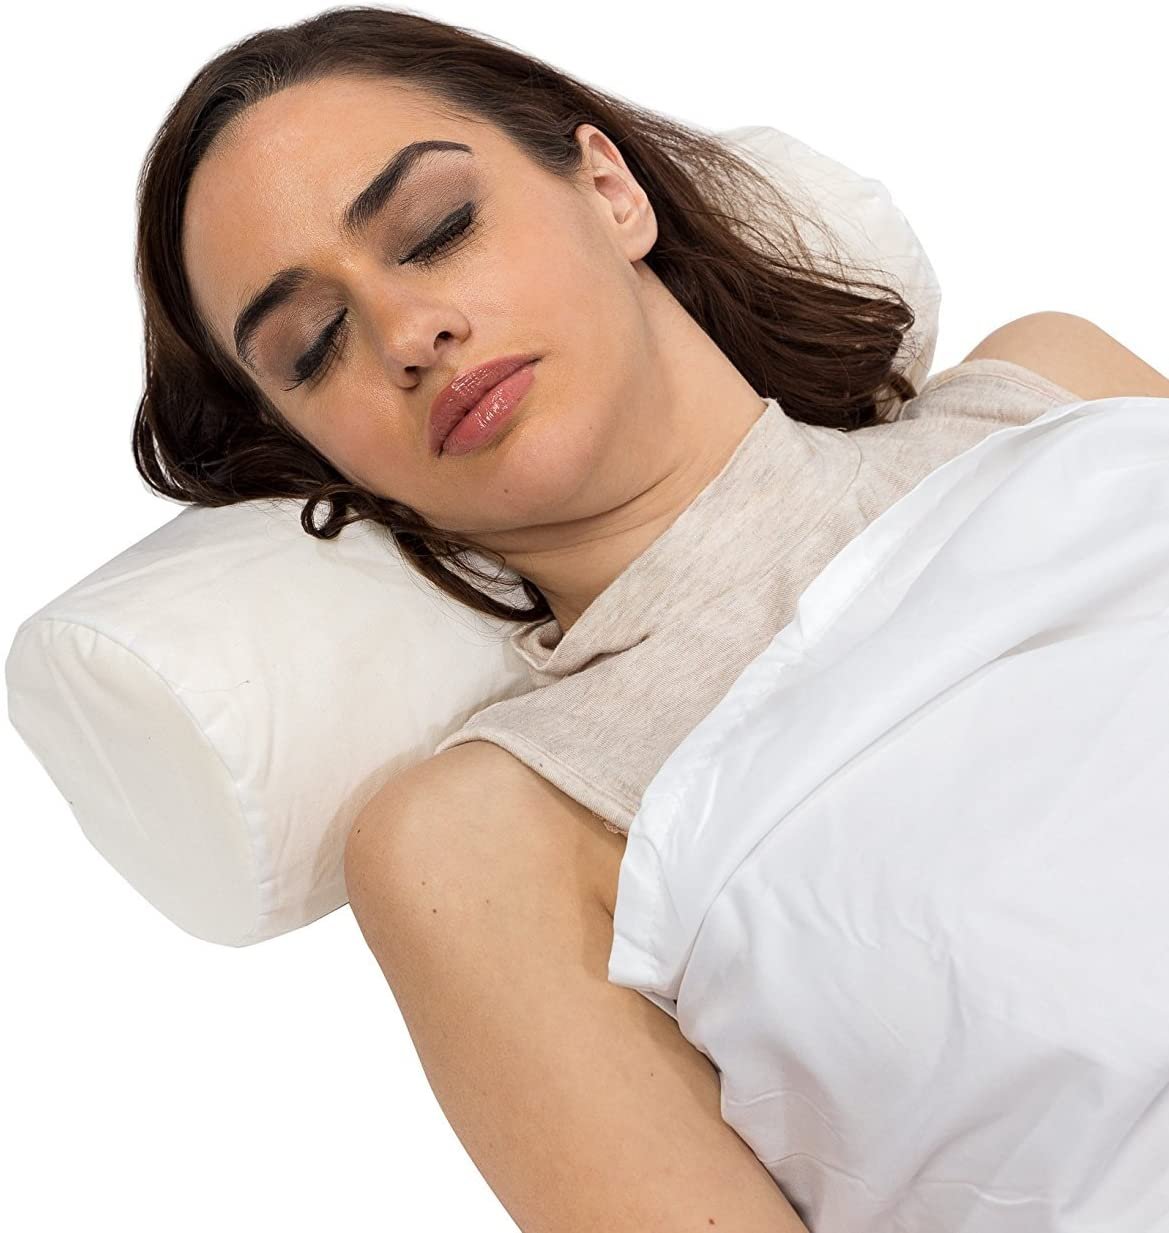 Premium Comfort Round Extra Firm Cervical Neck Pillow Roll - 5.5" x 14.5" - Pillow Case Included - Mars Med Supply